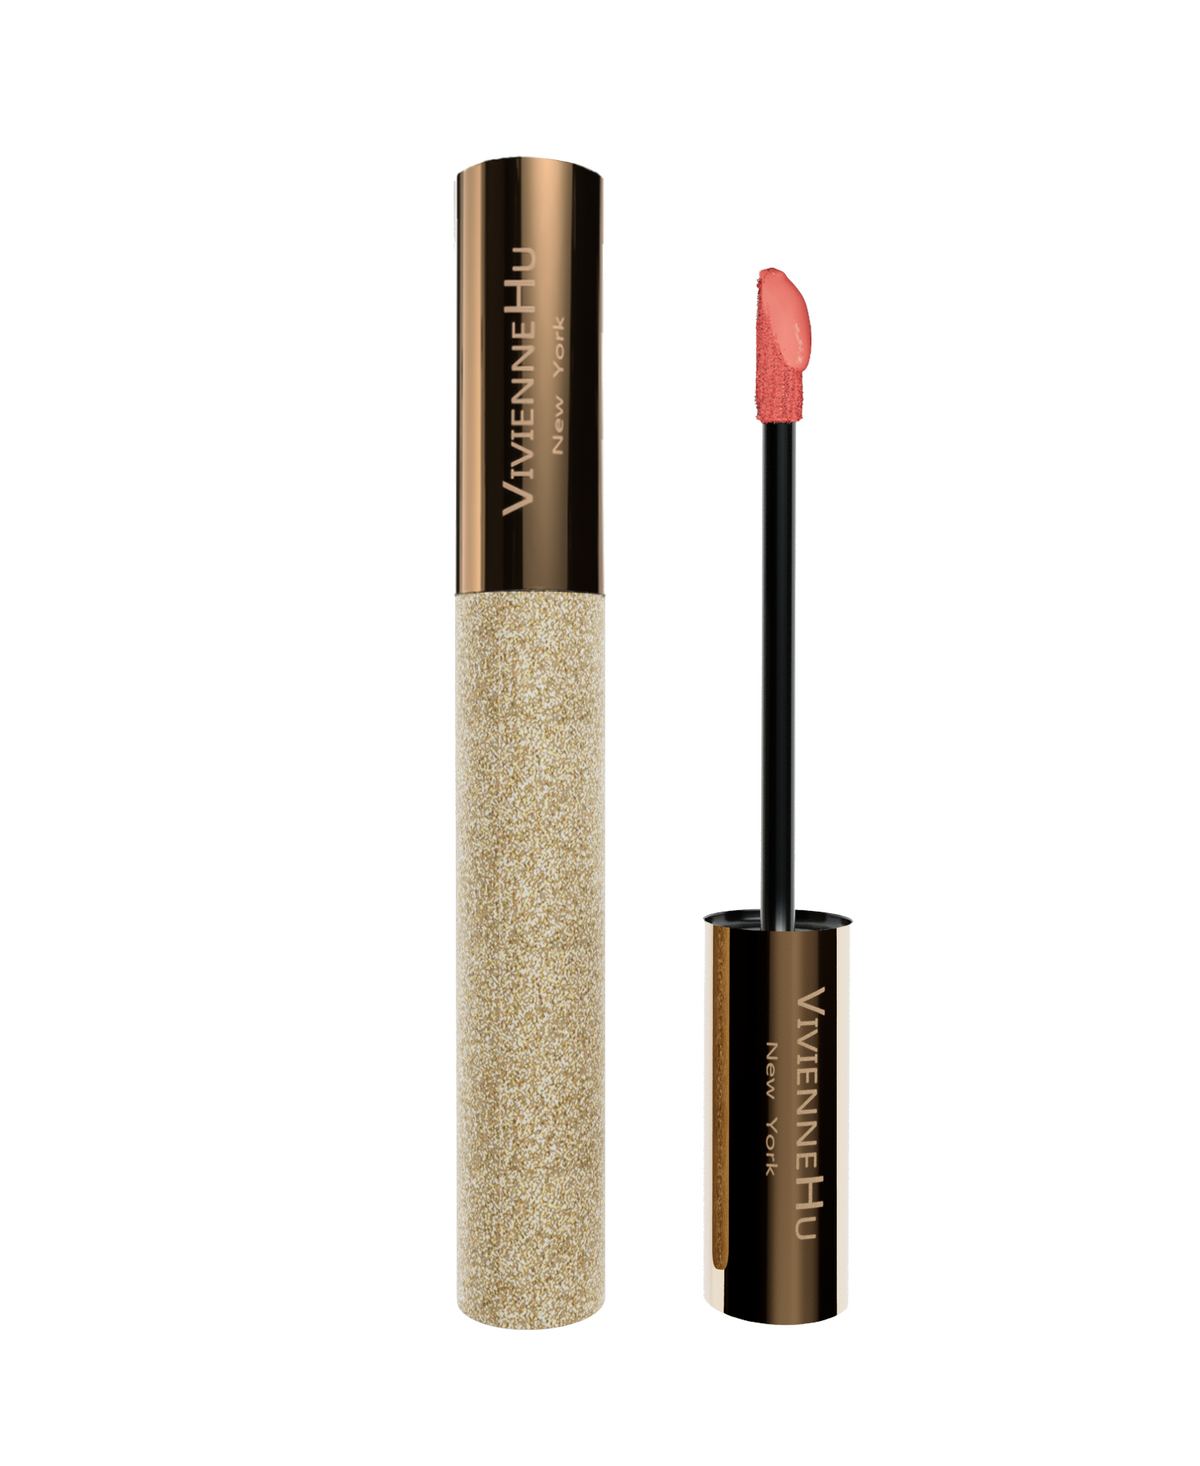 GOLDSAND LONG-TERM HYDRATION EFFECT LIP PLUMPING GLOSS – WITH HYALURONIC ACID|805 NUDEBROWN